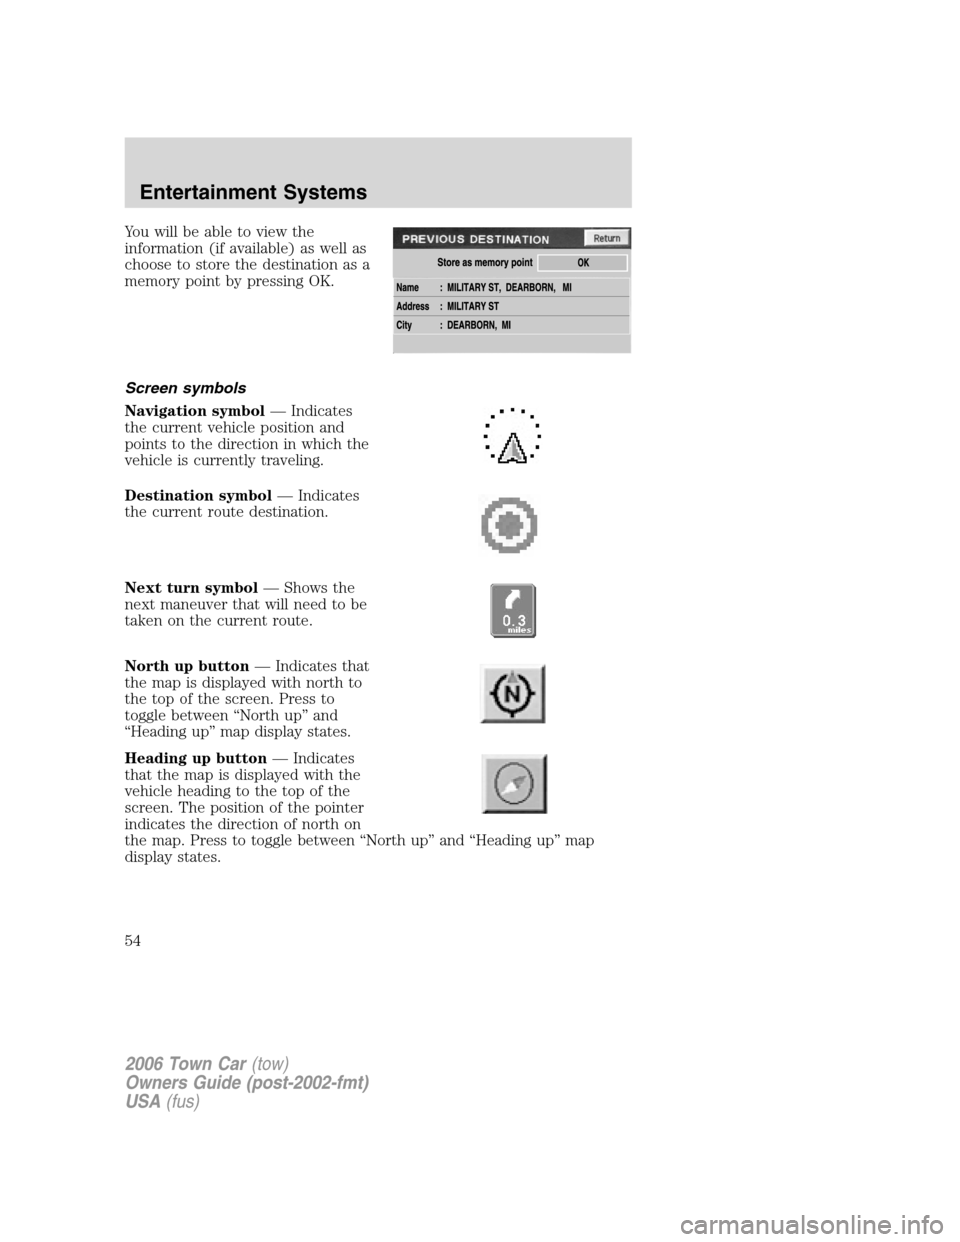 LINCOLN TOWN CAR 2006 Workshop Manual Youwillbeabletoviewthe
information (if available) as well as
choose to store the destination as a
memory point by pressing OK.
Screen symbols
Navigation symbol— Indicates
the current vehicle positio